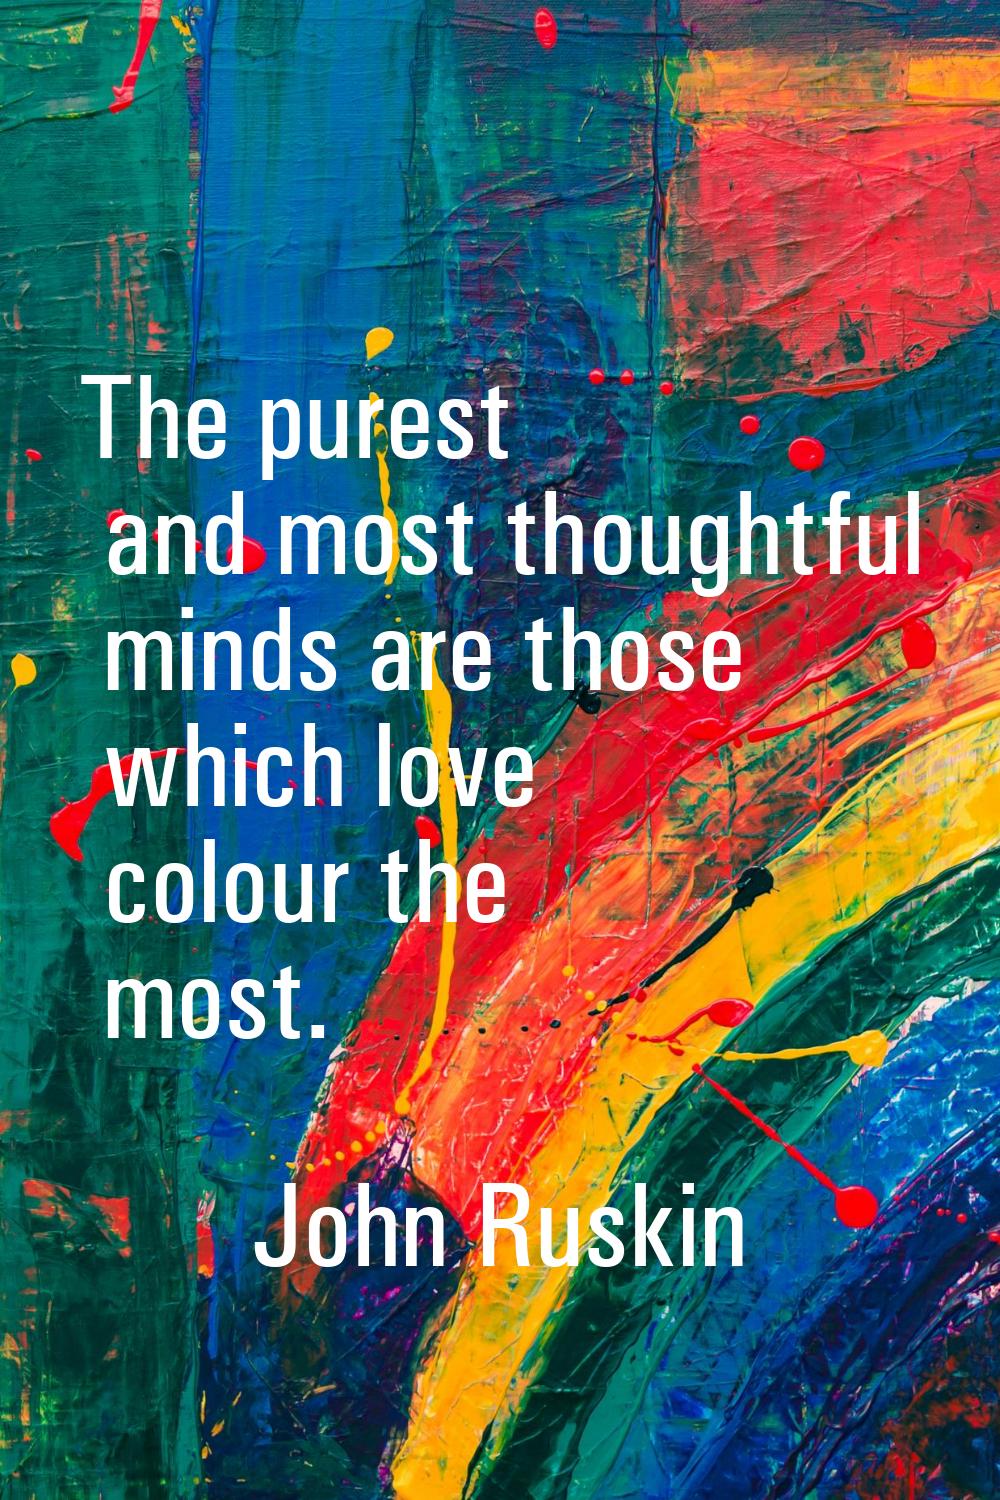 The purest and most thoughtful minds are those which love colour the most.